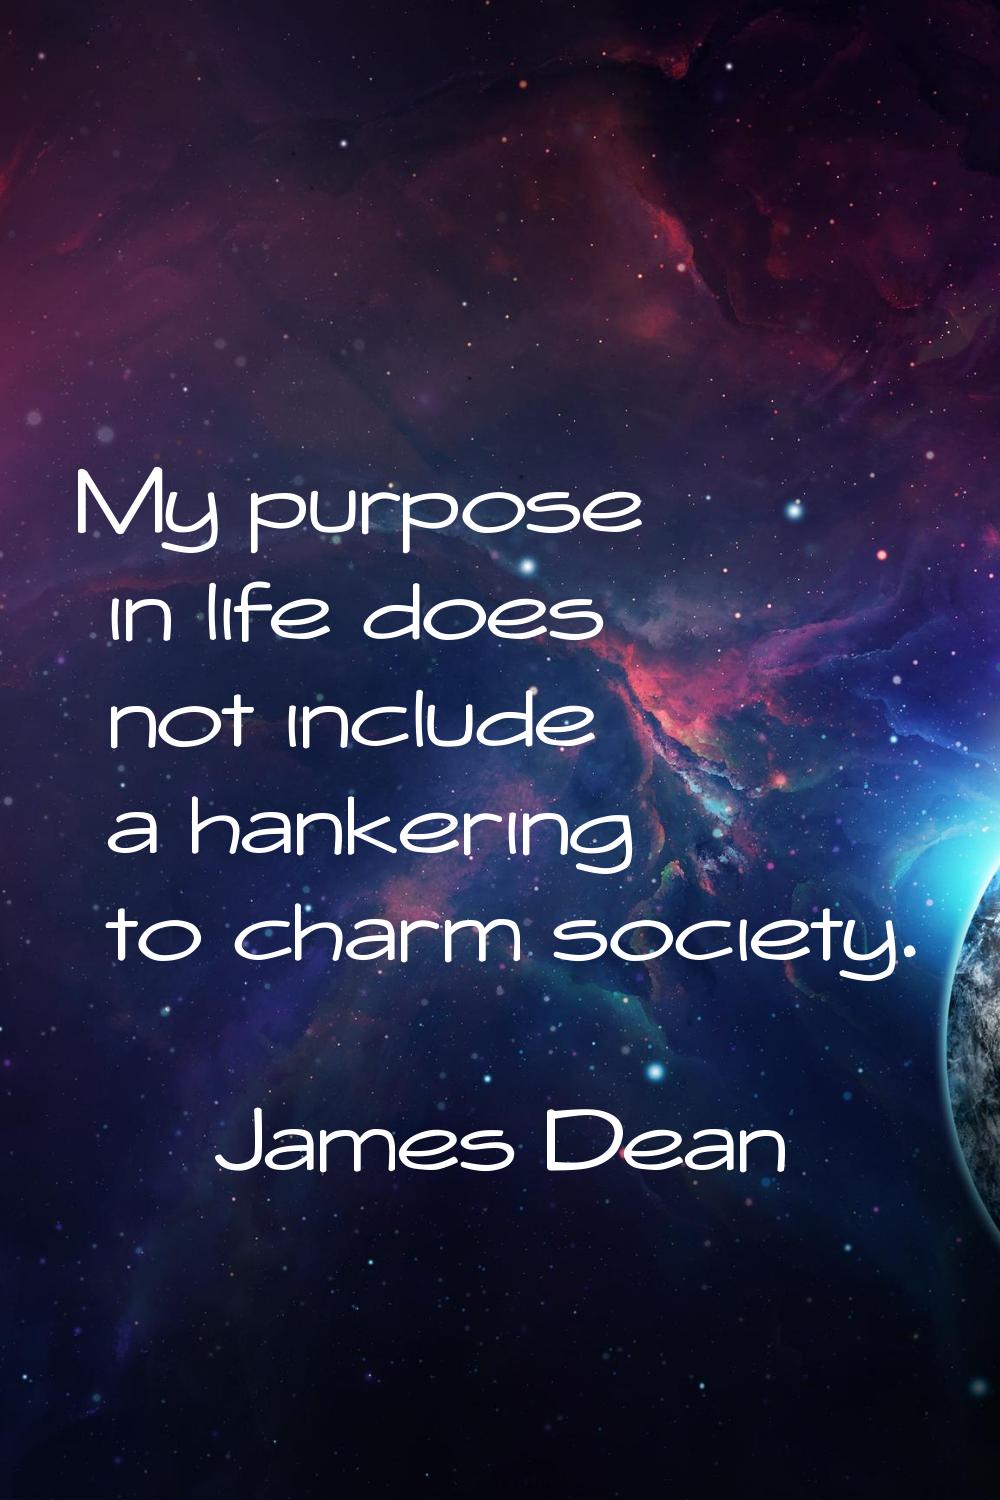 My purpose in life does not include a hankering to charm society.